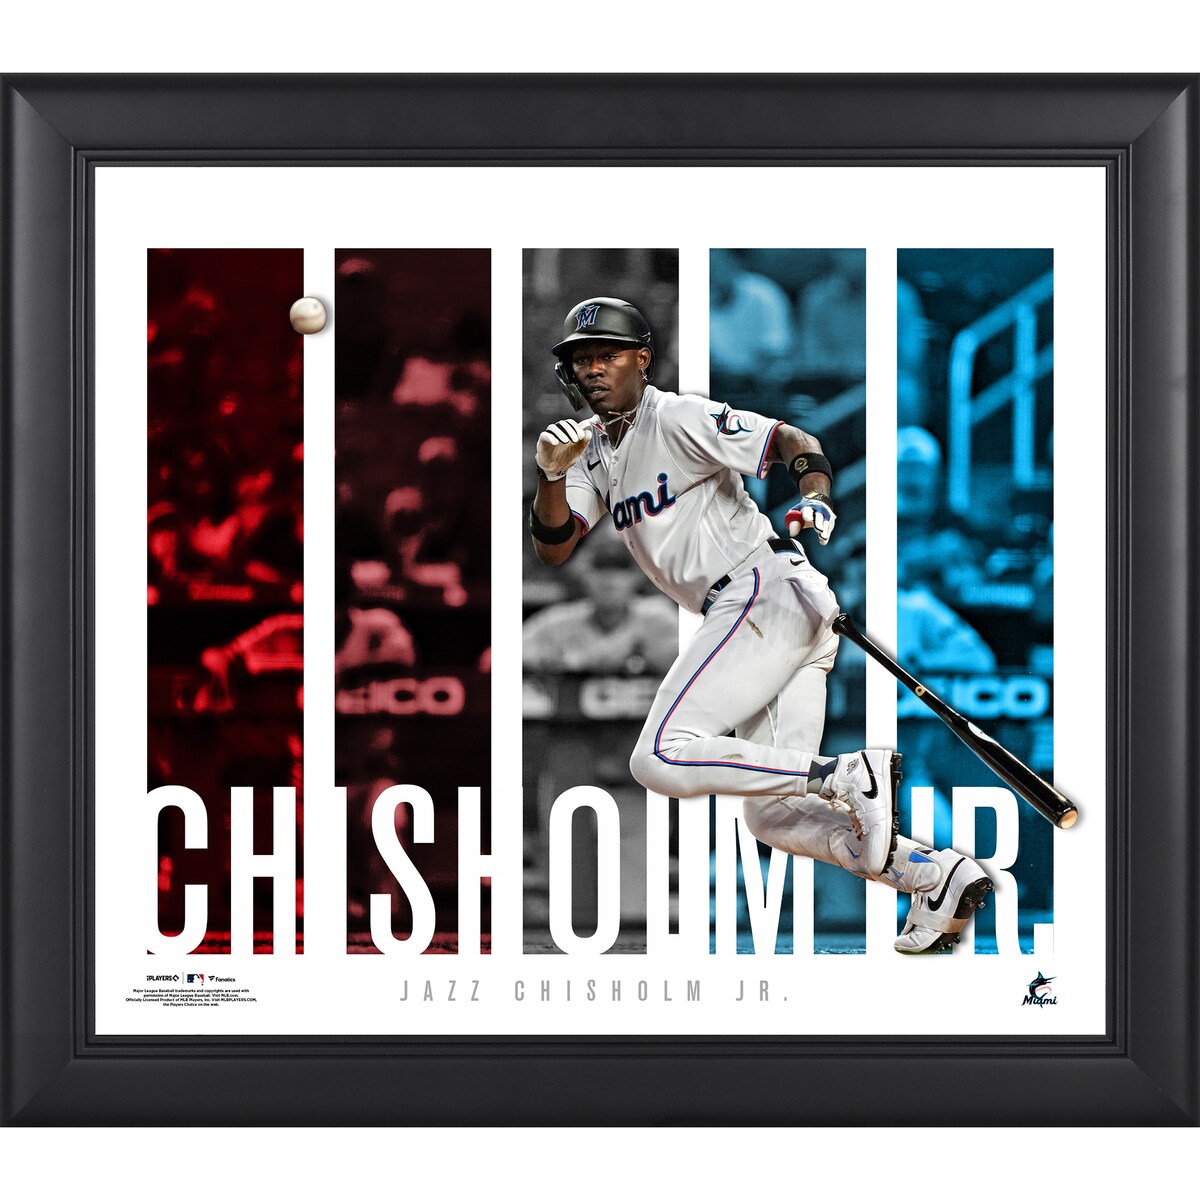 If Jazz Chisholm Jr. is one of your favorite players on the Miami Marlins, then be sure to pick up this Framed 15" x 17"...